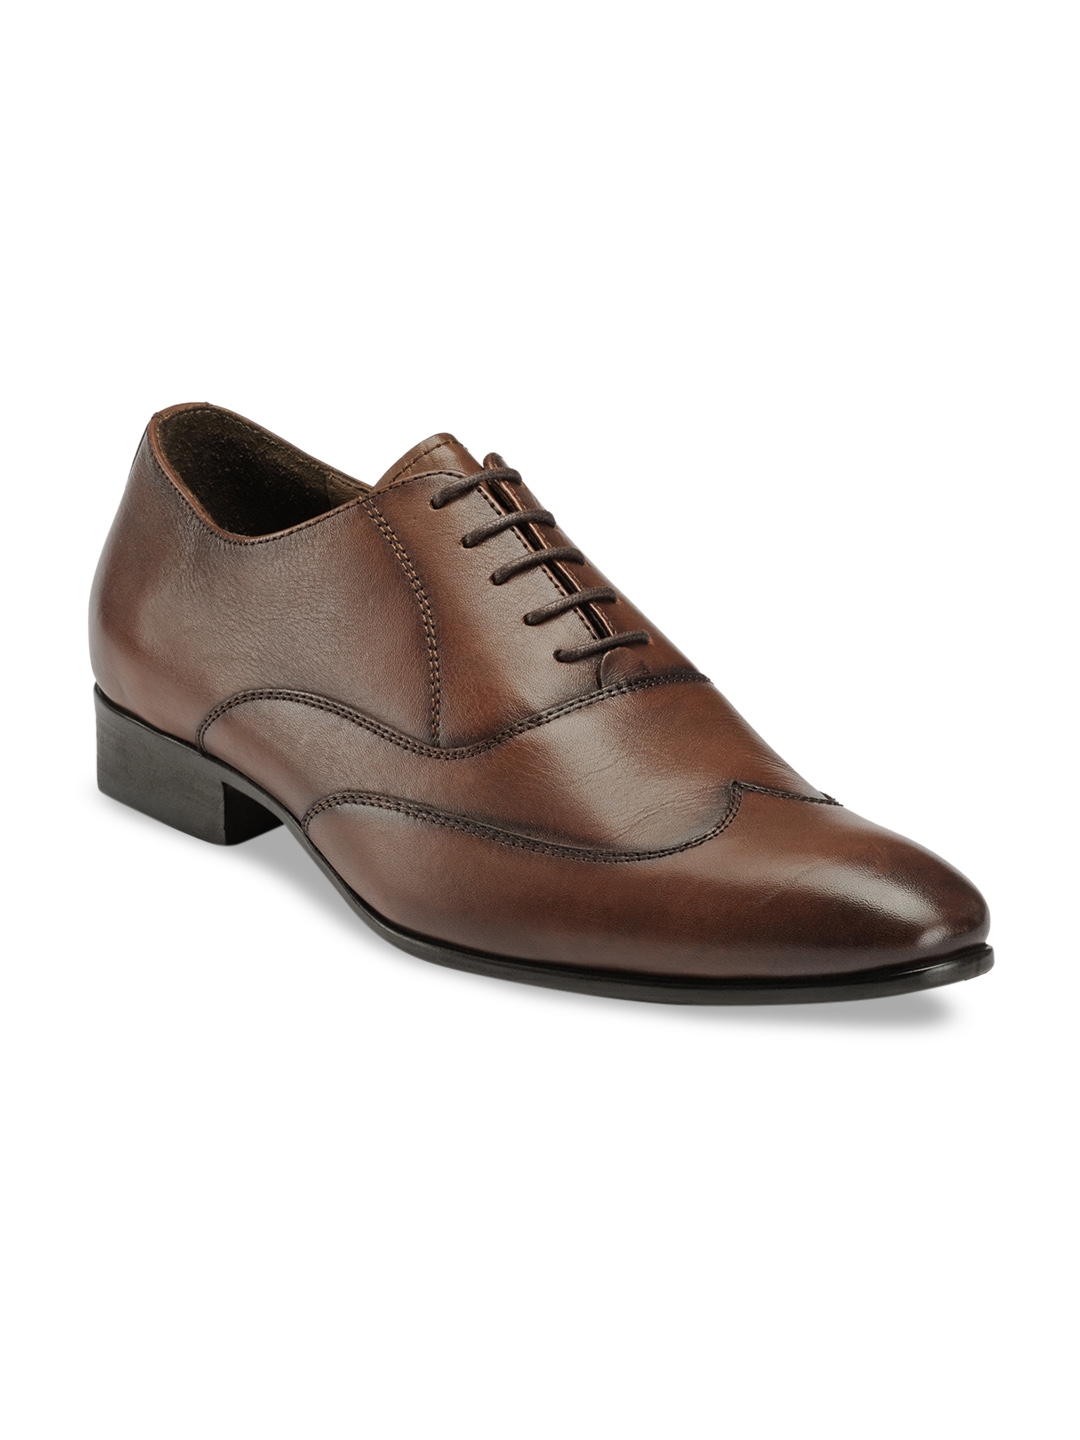 Buy Teakwood Leathers Men Brown Solid Leather Oxfords - Formal Shoes